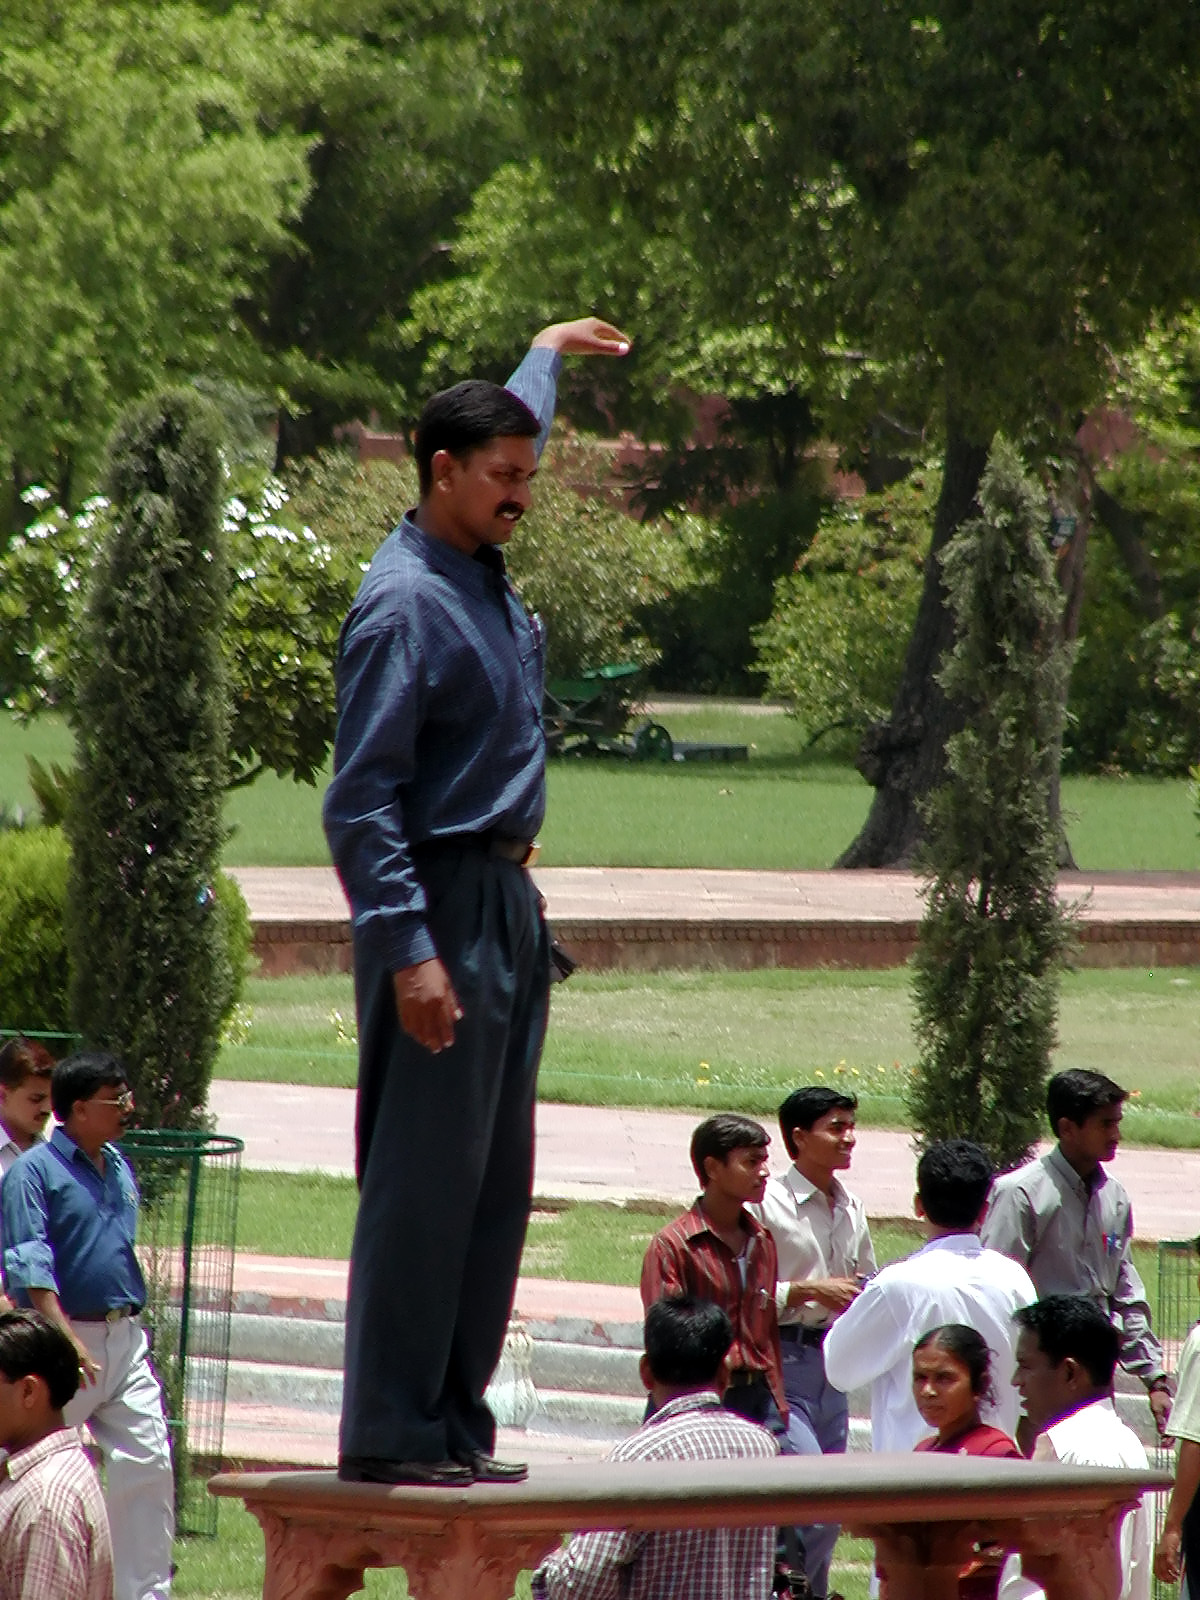 10-Jun-2001 12:11 - Agra - The Taj Mahal - Photo point .. the person being photographed is trying to appear to be pointing to the top of the Mausoleum